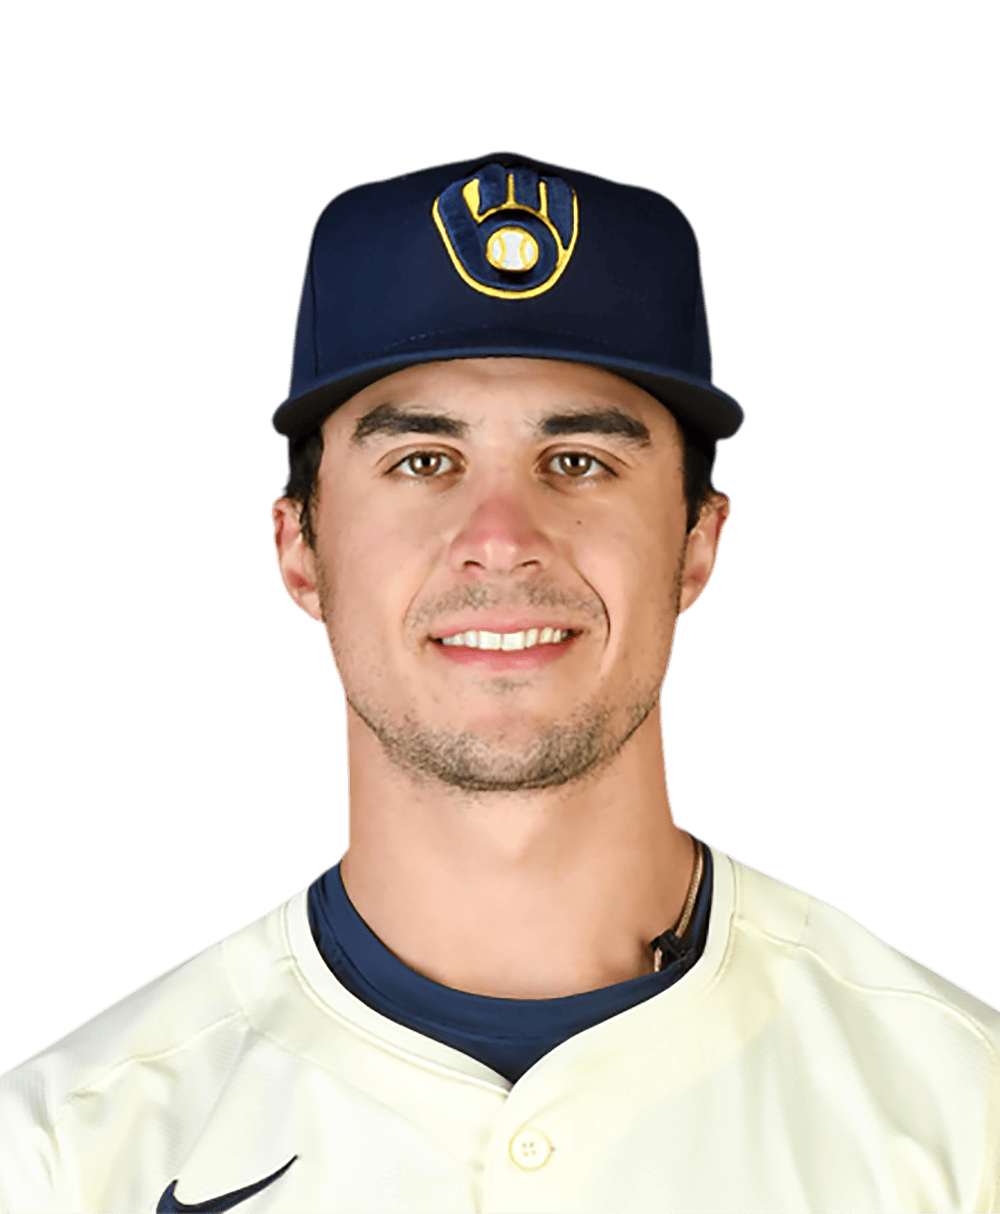 Brewers' latest signing brings a lot of potential power to lineup